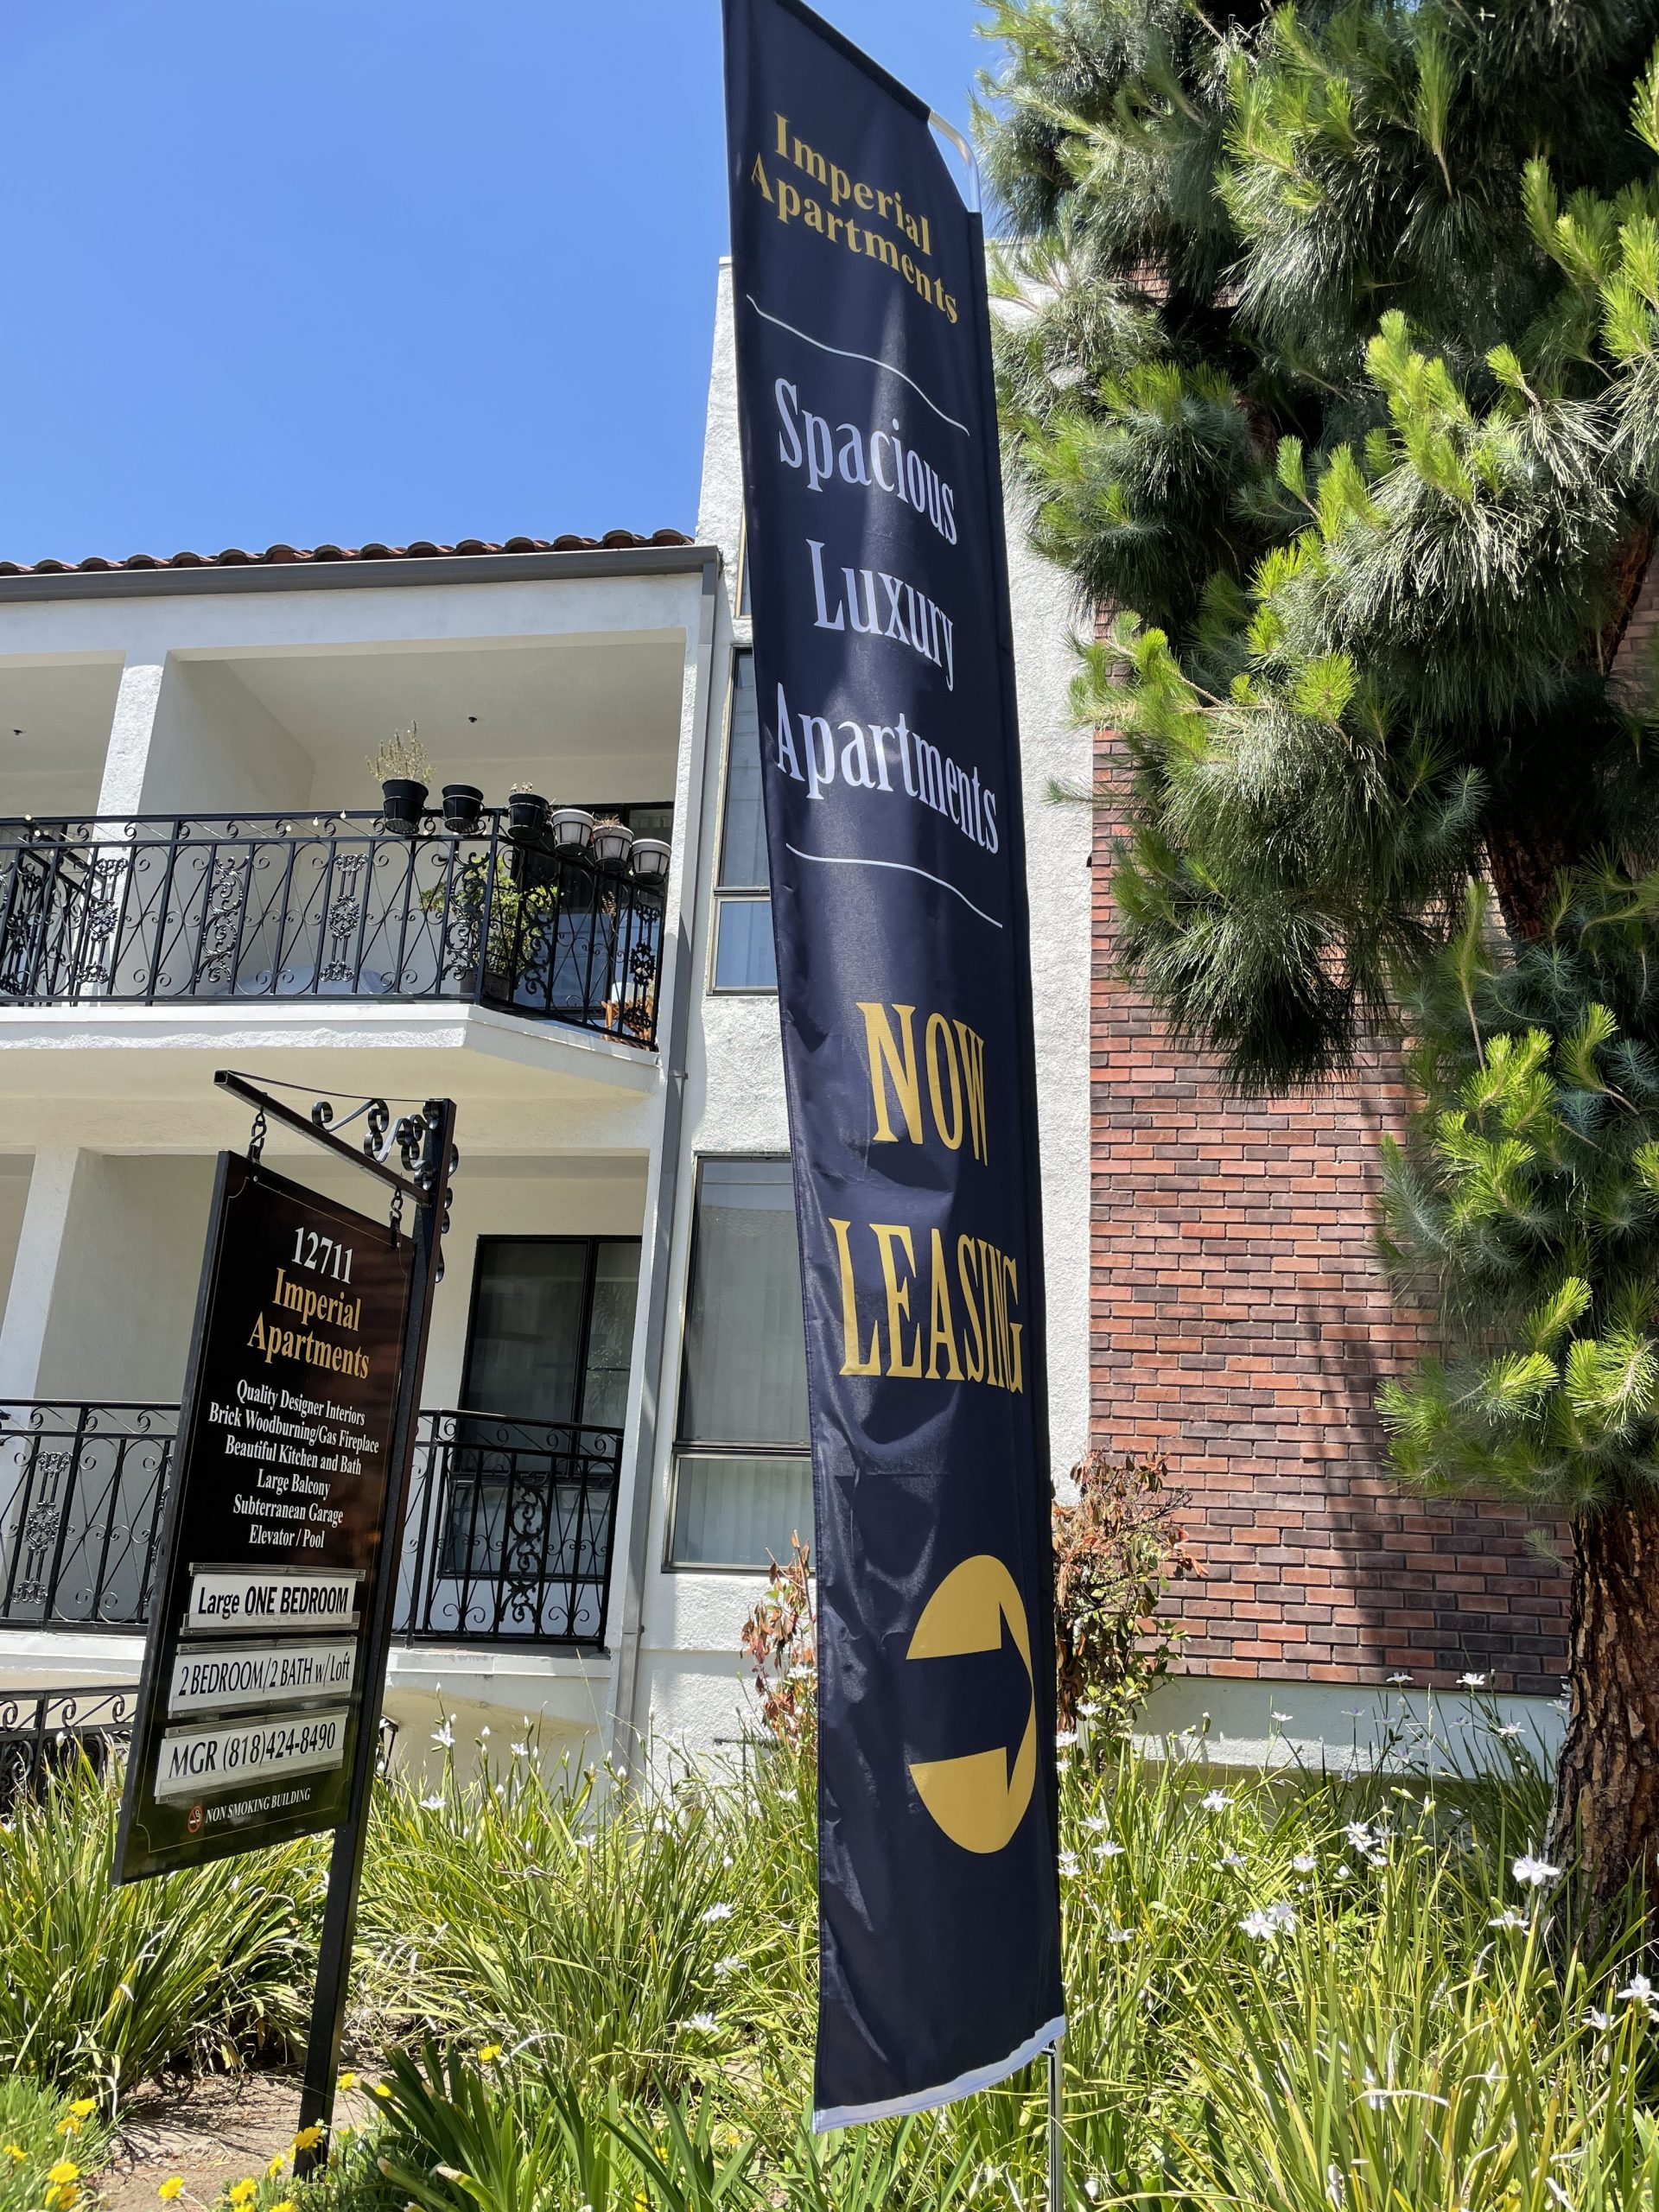 Real estate firms can reach customers better with advertisement banners detailing their properties. Like our signs for Imperial Apartments in Studio Cities.